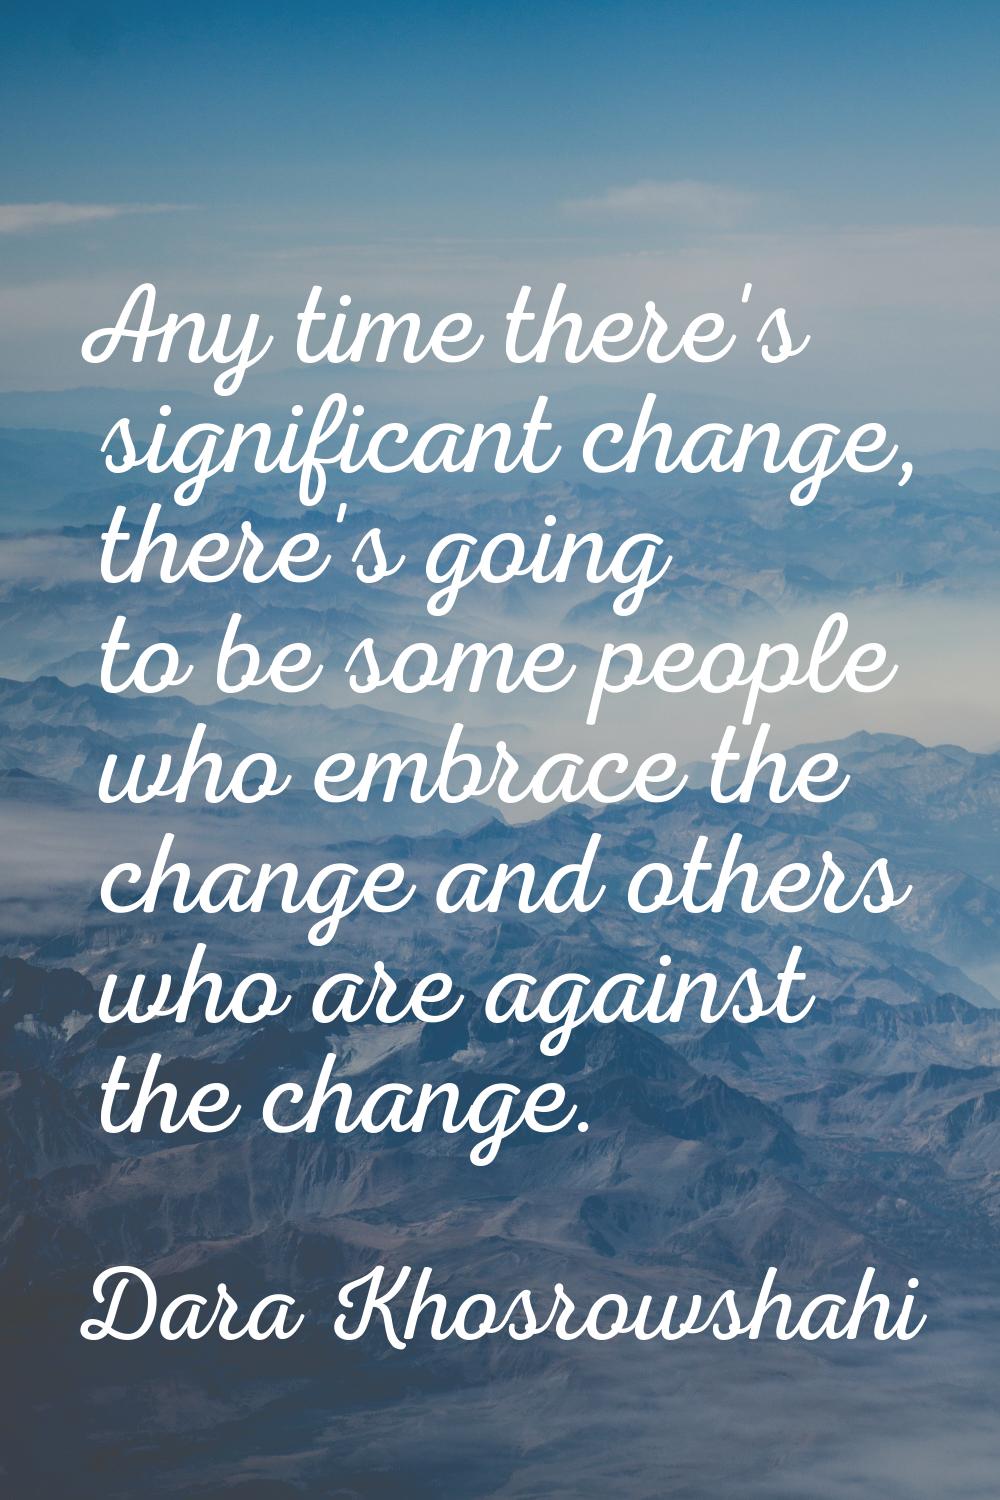 Any time there's significant change, there's going to be some people who embrace the change and oth